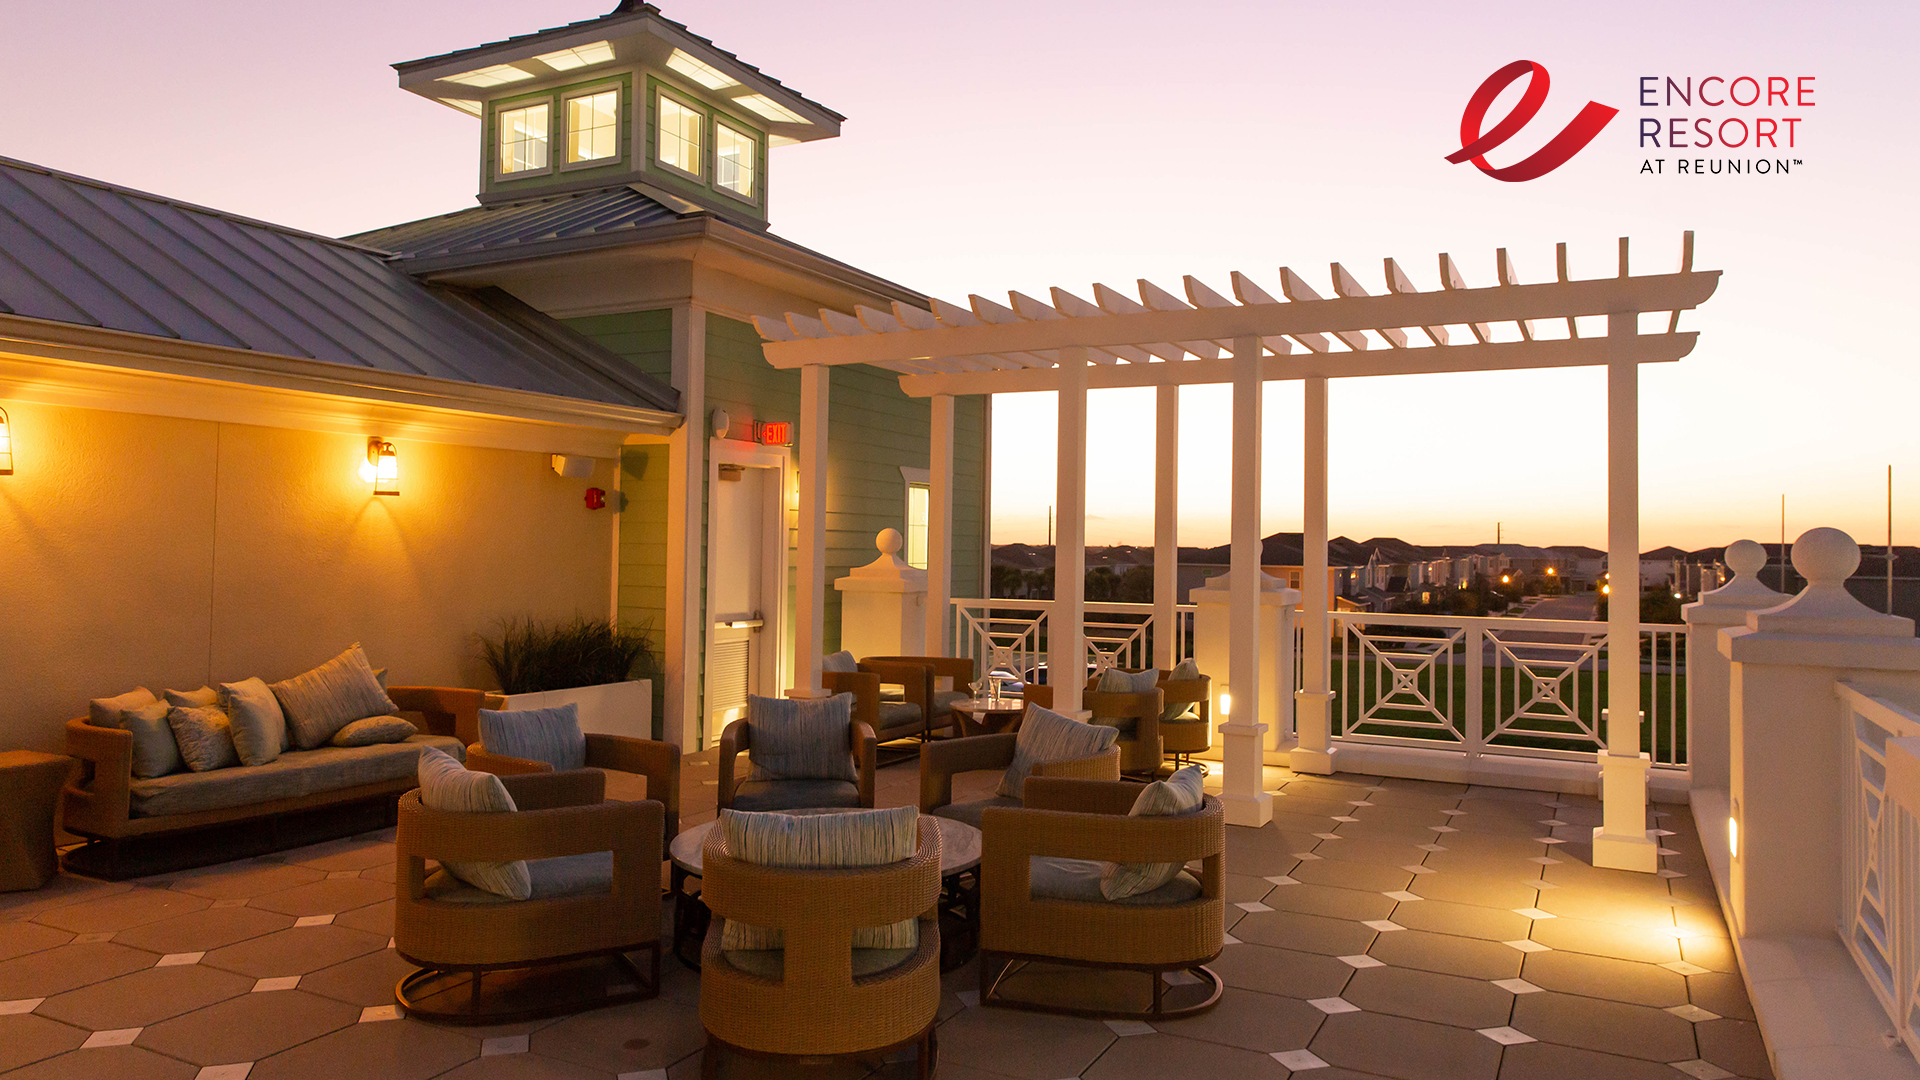 Desktop wallpaper featuring the Encore Resort Clubhouse deck at sunset.